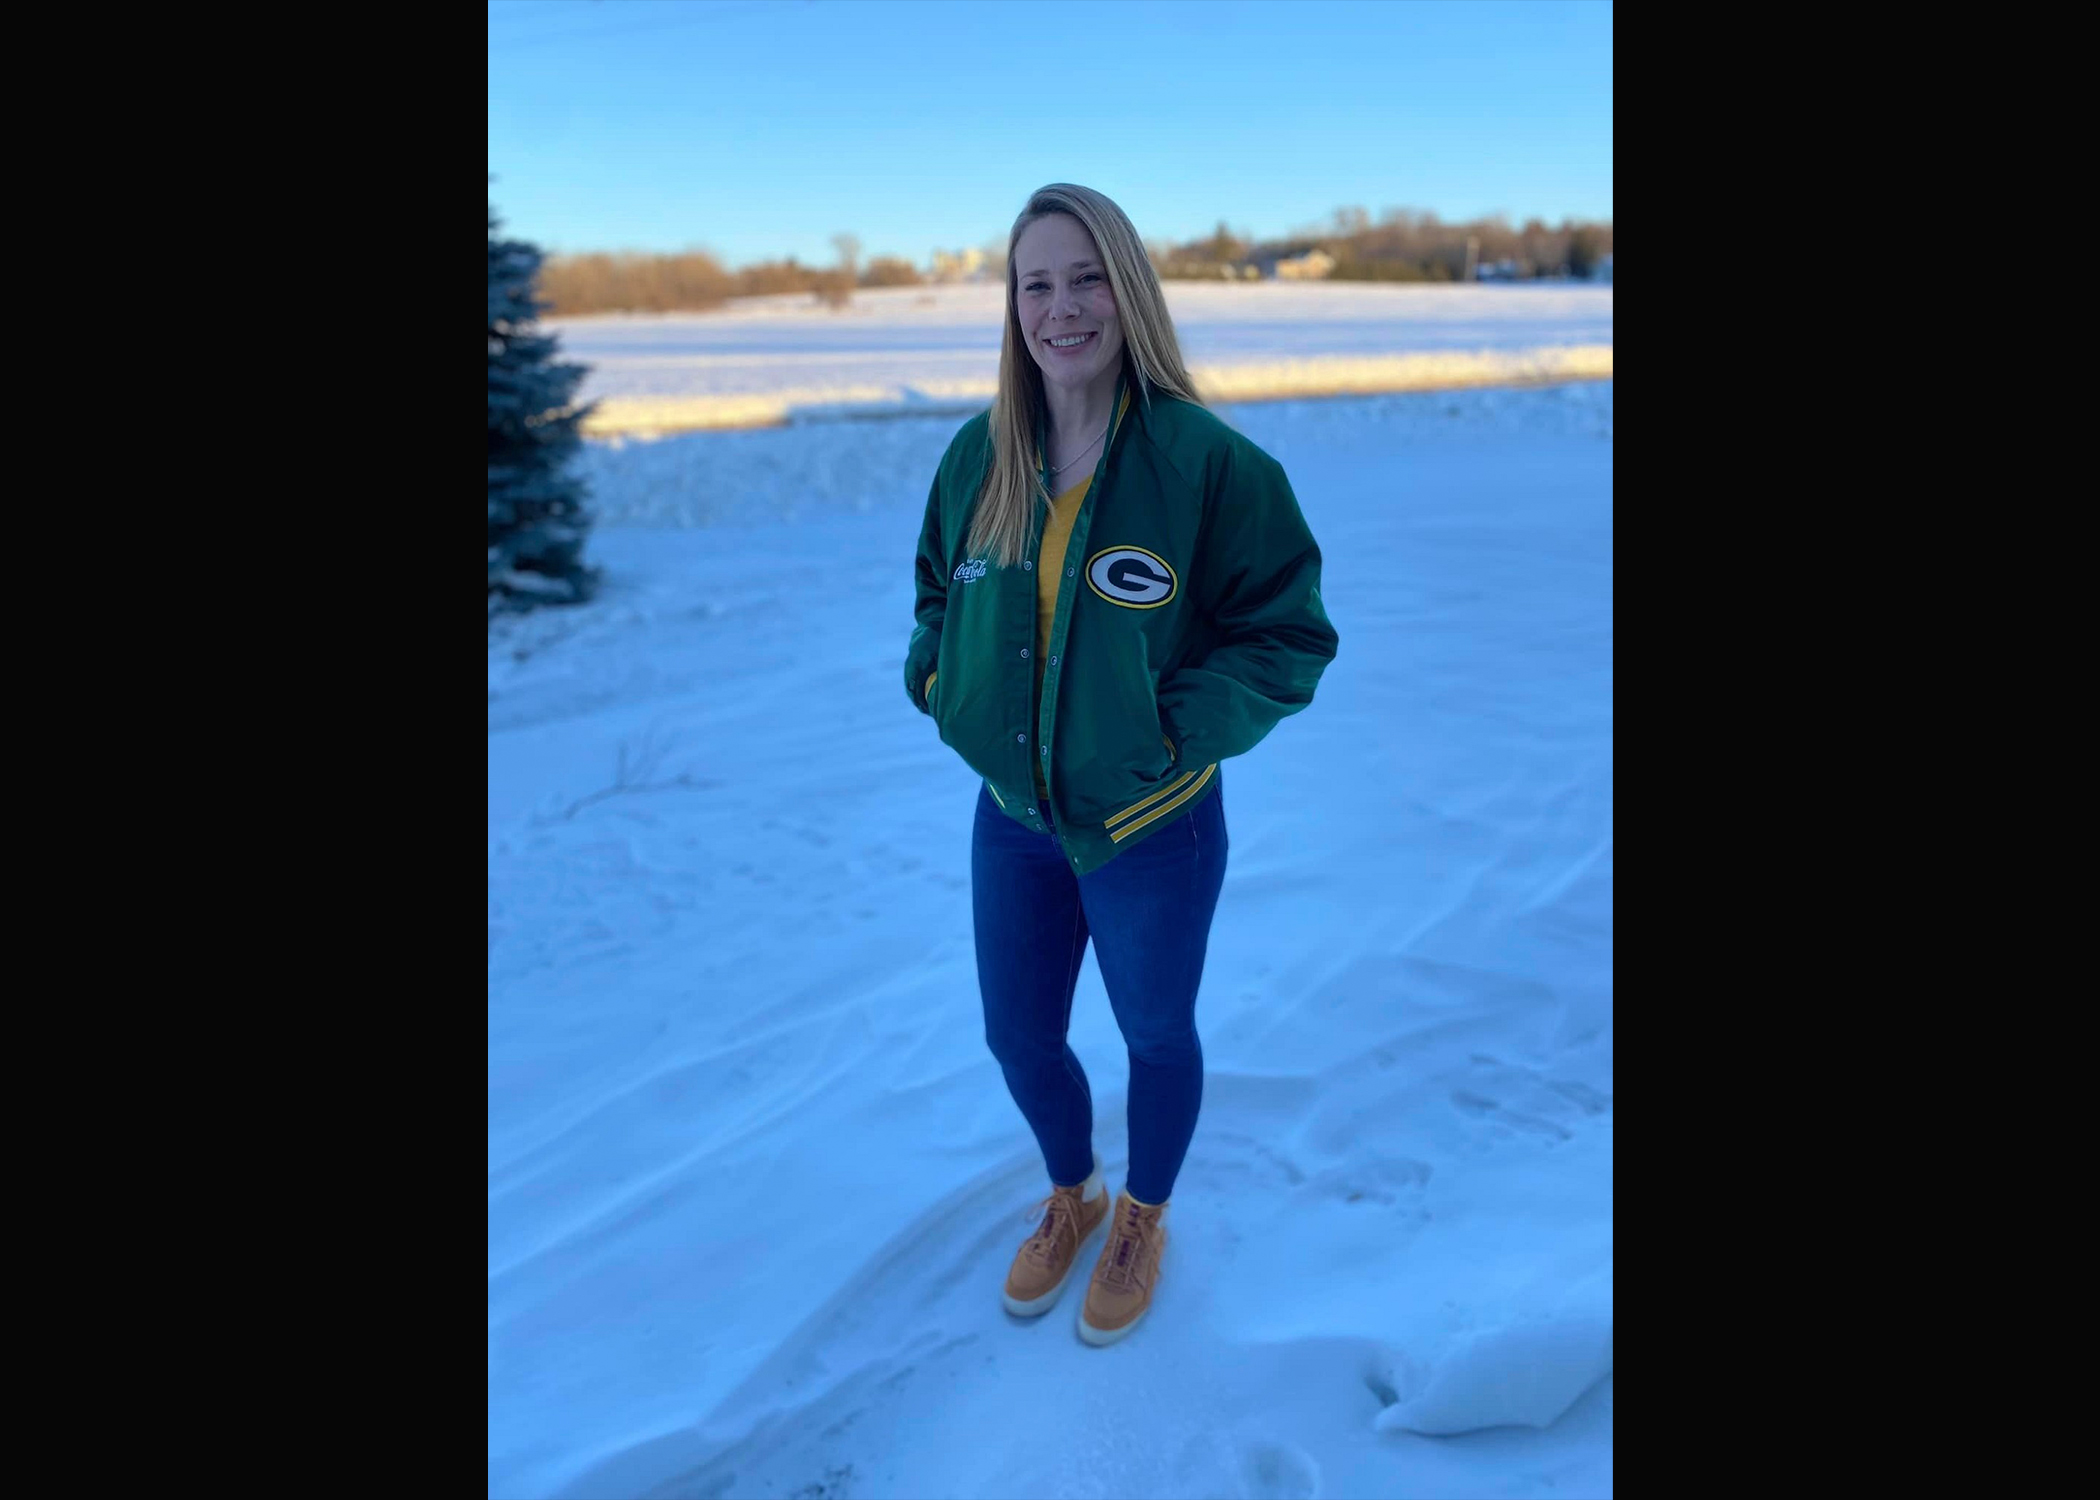 Molly Schroeder-Linzmeier is one of the 538,967 shareholders of the Green Bay Packers. The former Brown County librarian talked about about this with her coworker during a StoryCorps Mobile Tour stop in Green Bay, Wisconsin in 2023. (Photo courtesy of Molly Schroeder-Linzmeier)